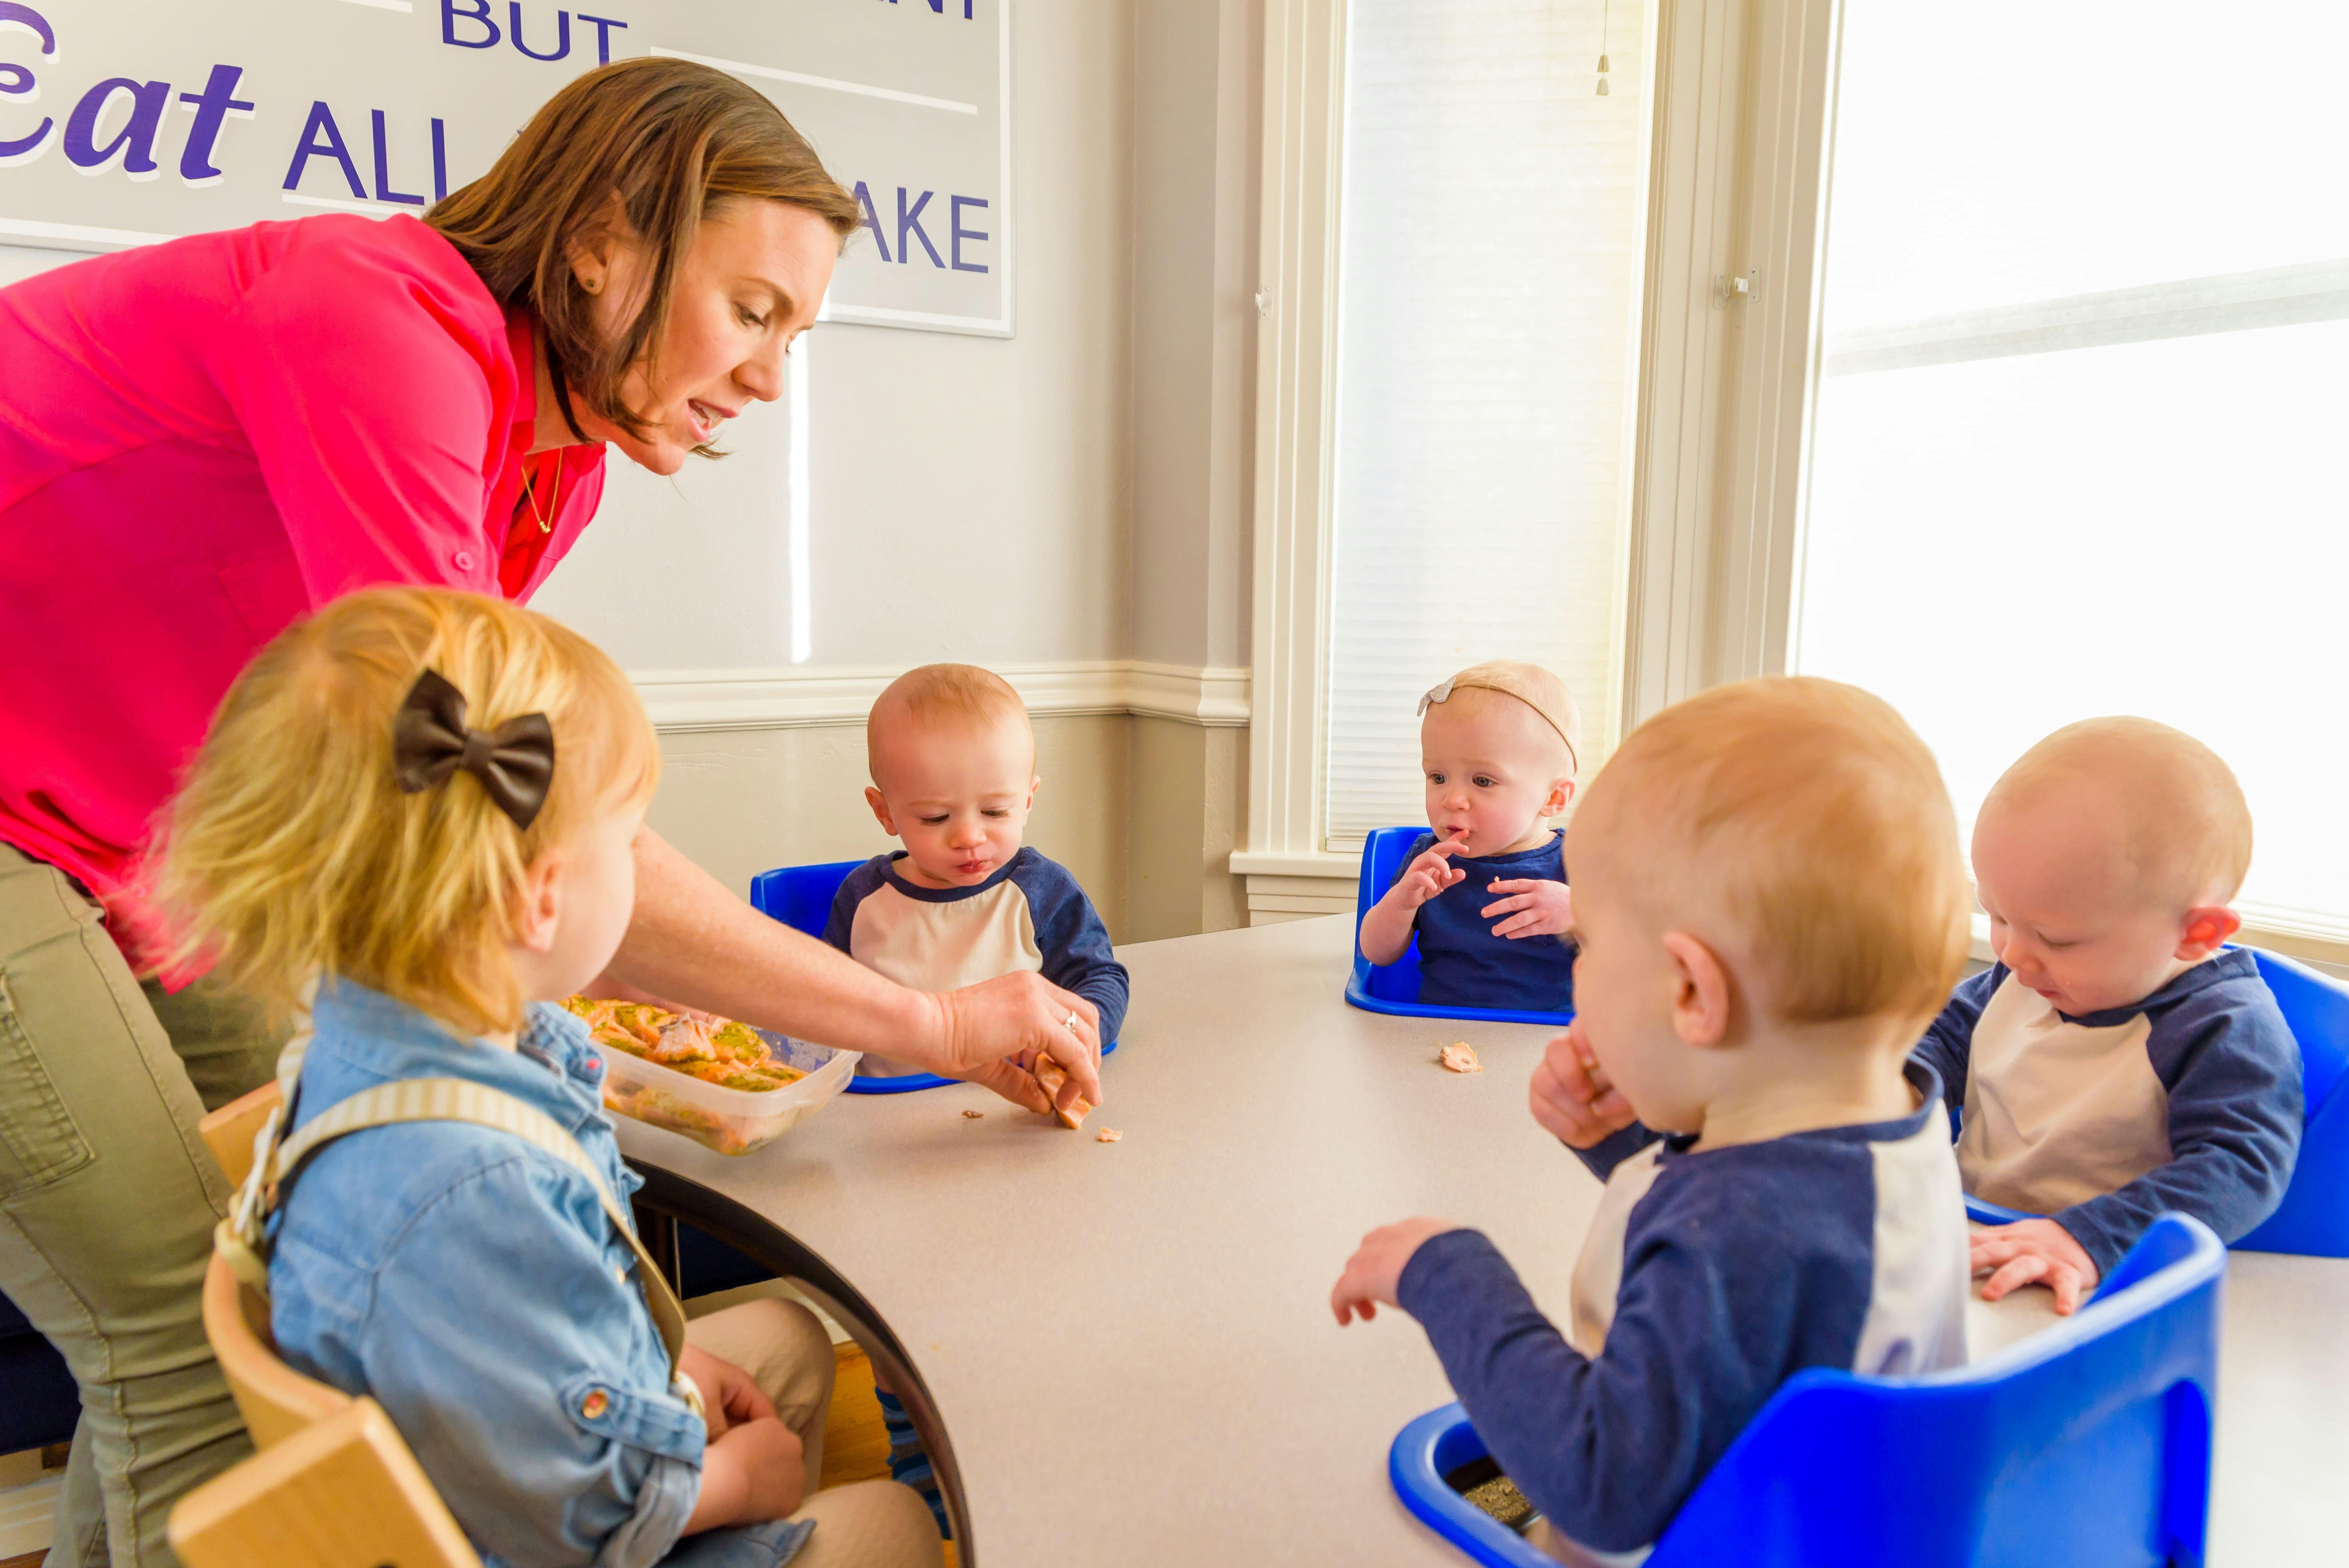 Katie Ferraro offering food to quadruplet babies in feeding table with toddler daughter in foreground